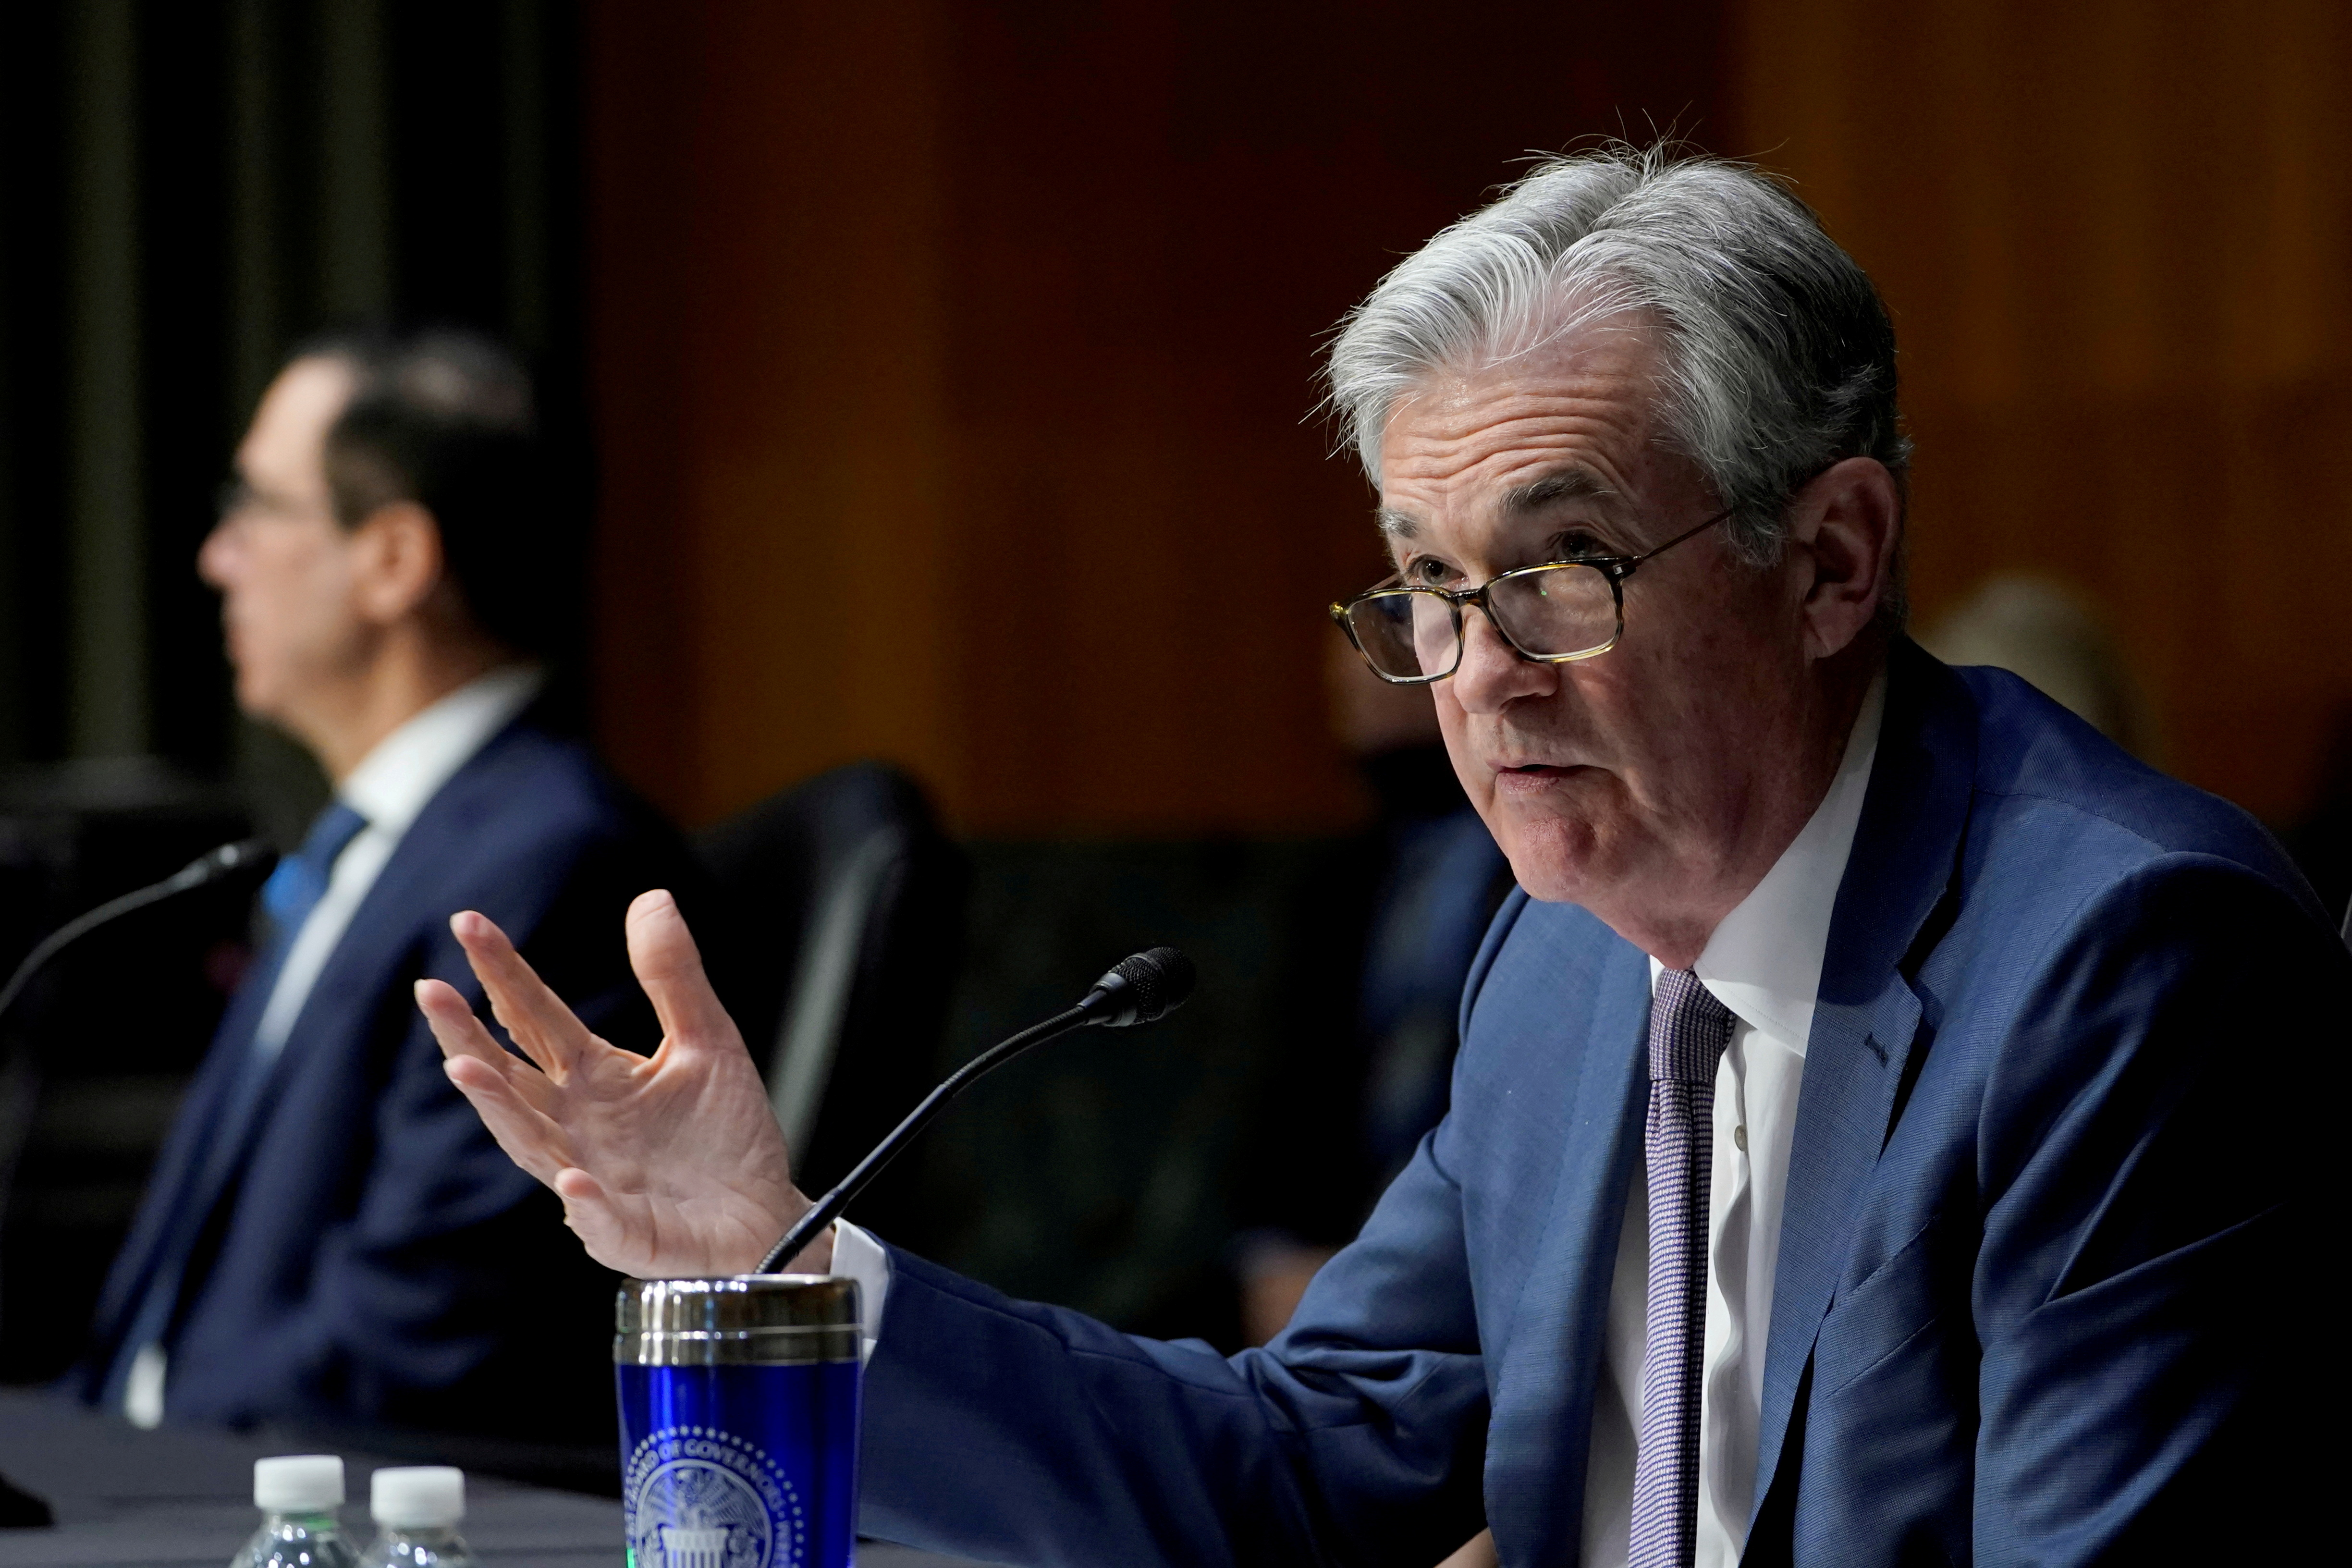 Federal Reserve Chair Jerome Powell testifies before the Senate Banking Committee in Washington